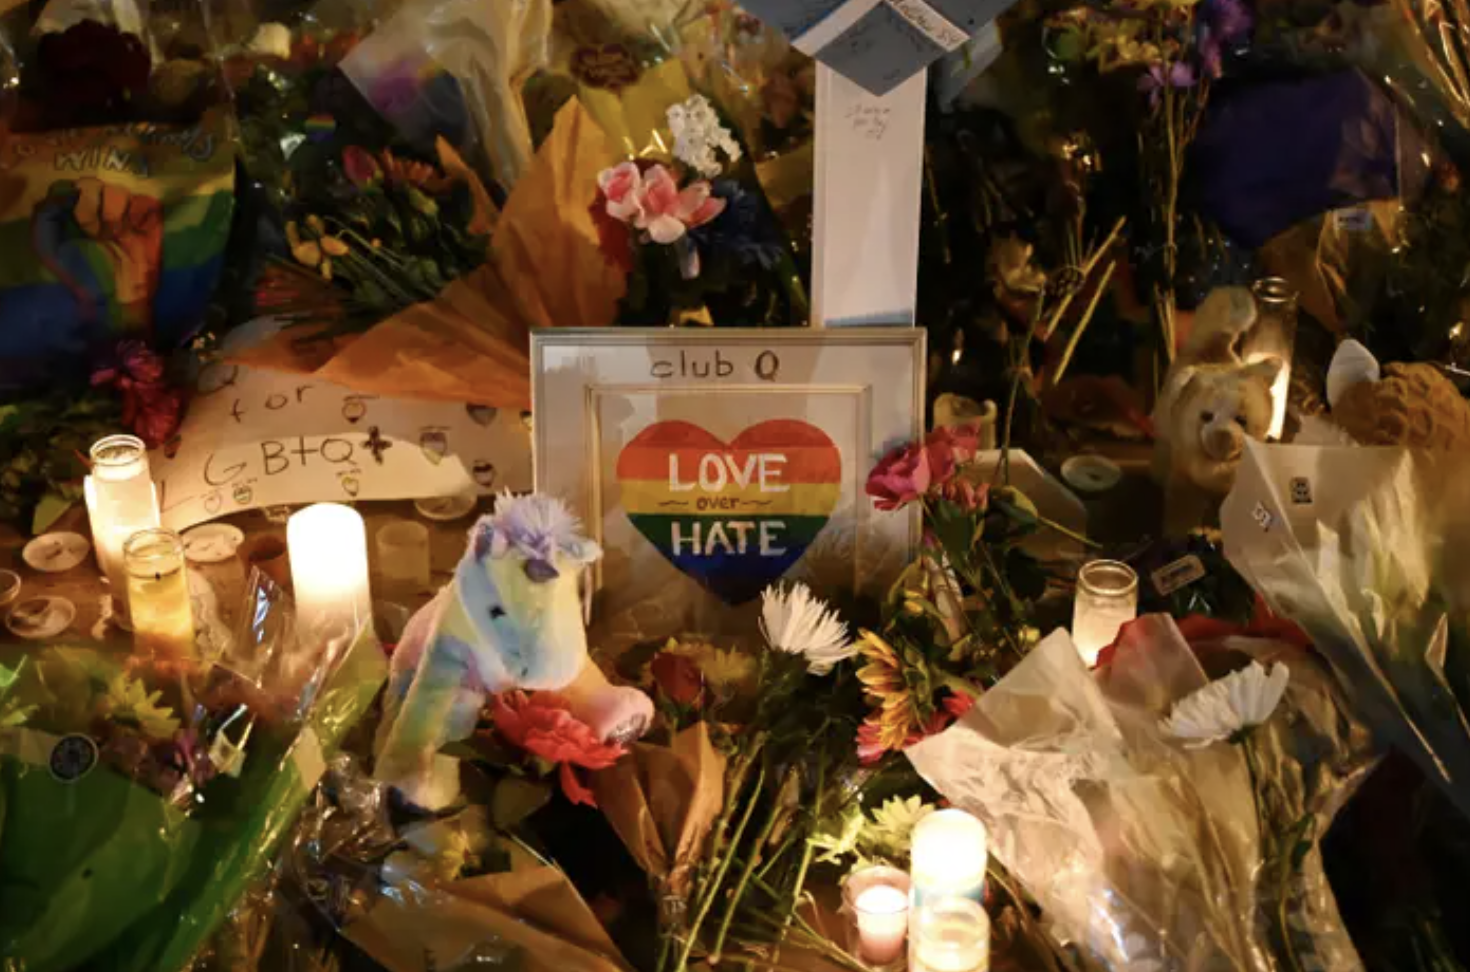 A memorial with flowers and candles and a small photo frame that says &quot;love over hate&quot; in a rainbow heart